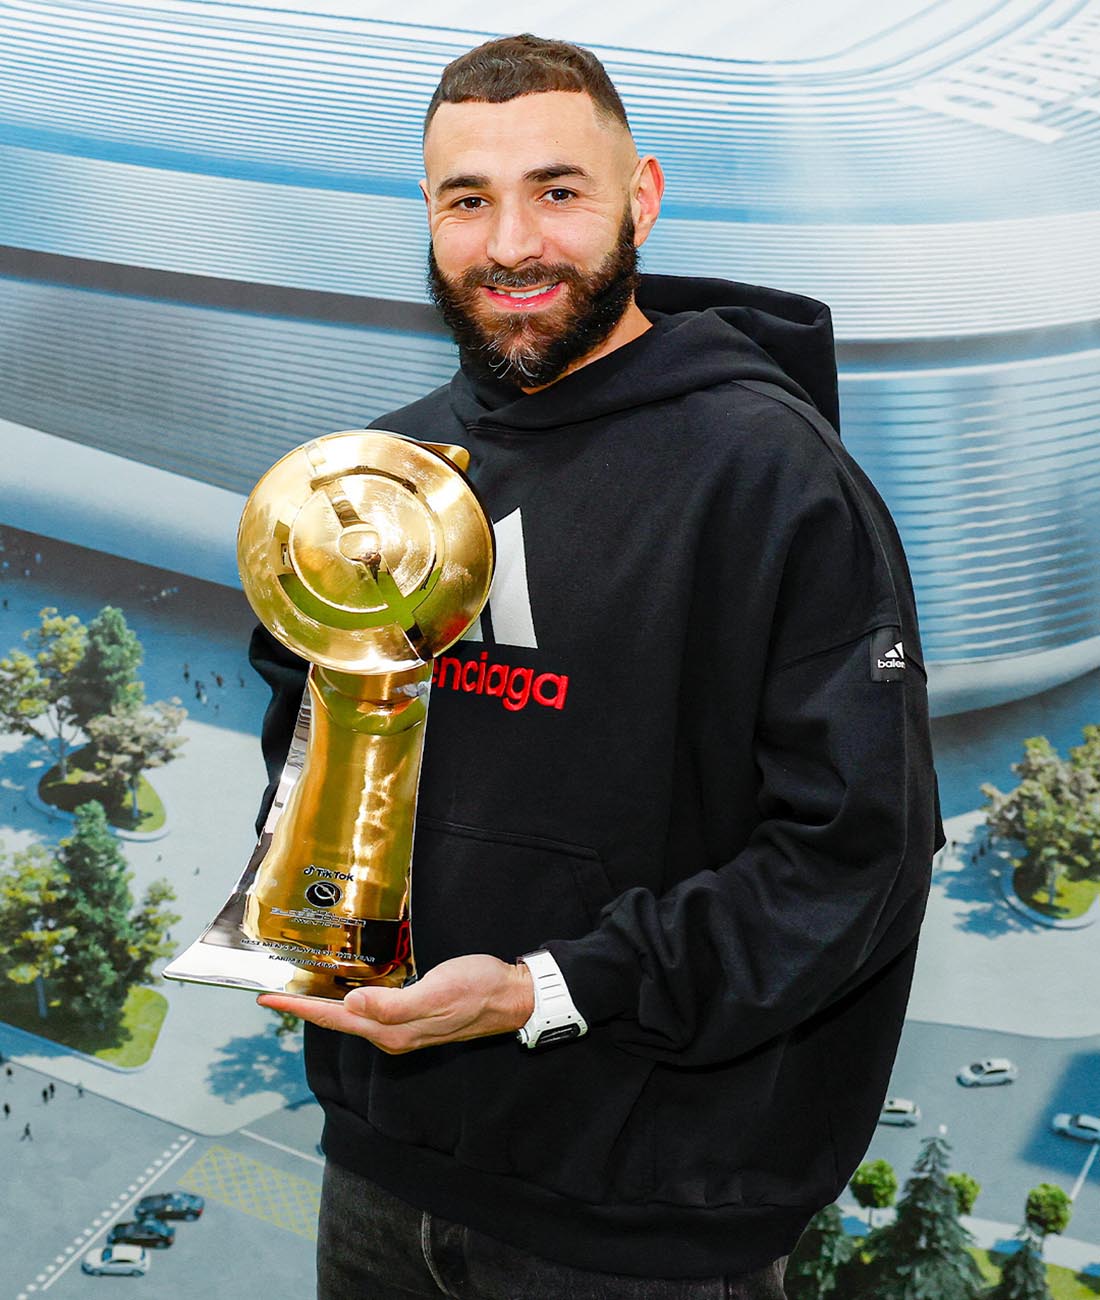 PHOTO: France football star Karim Benzema's dream of playing FIFA World Cup remains unfulfilled